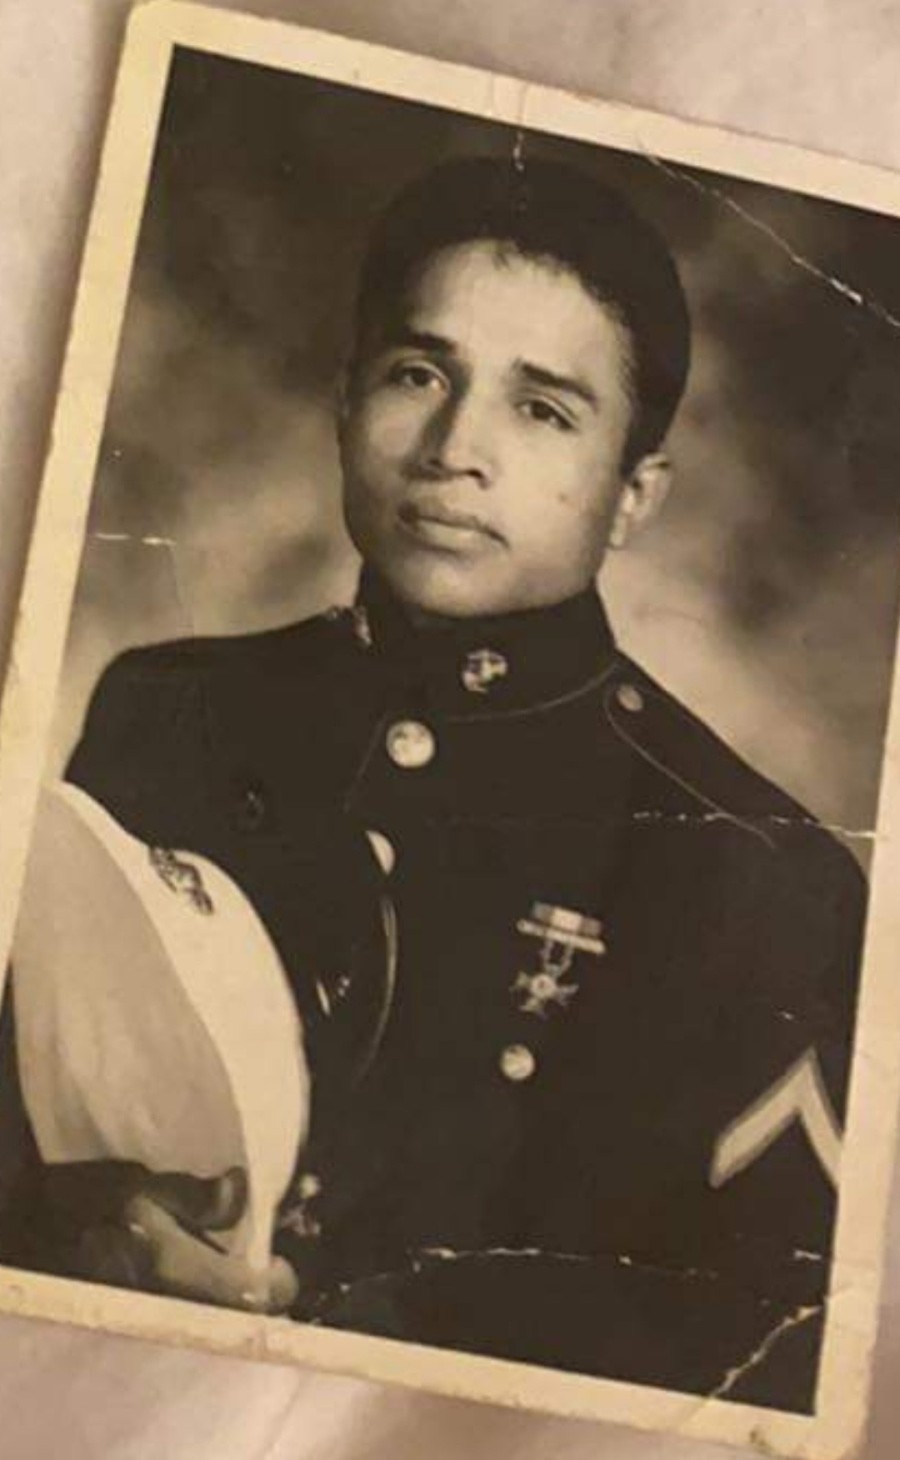 A young Javier Ramirez pictured in his military uniform.